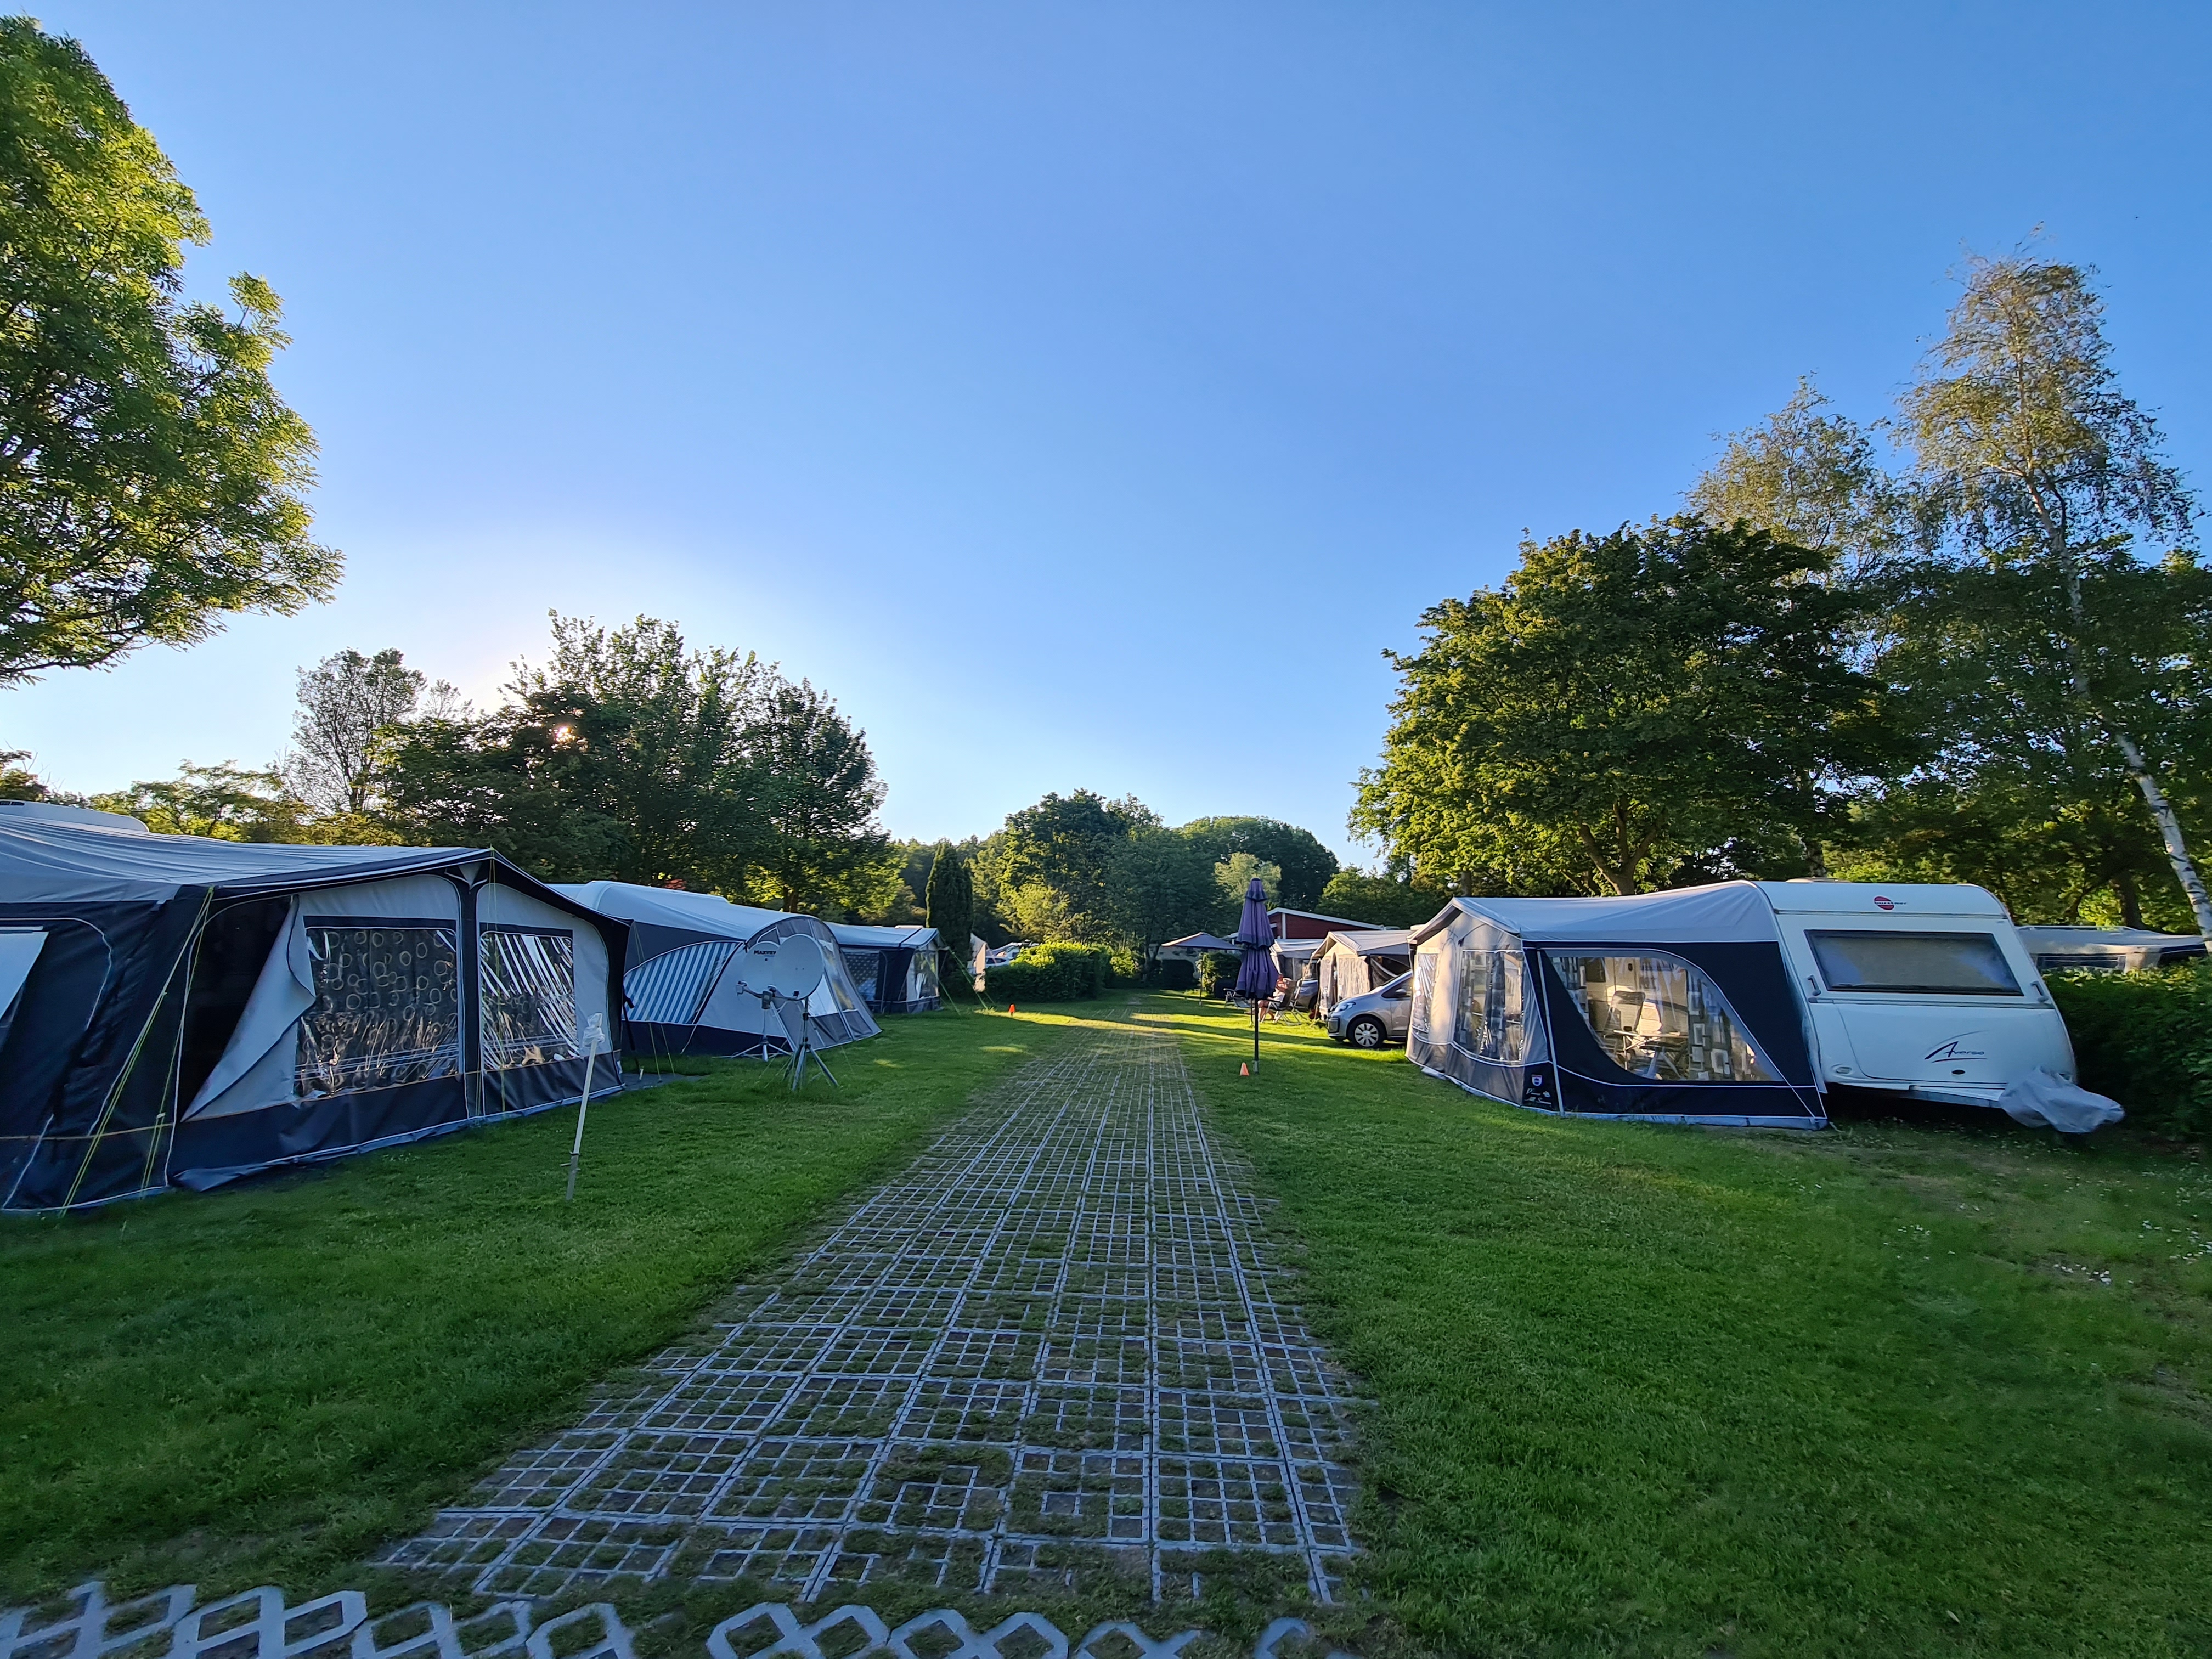 Comfortpitch Caravans (hardstanding, water connection and drainage)